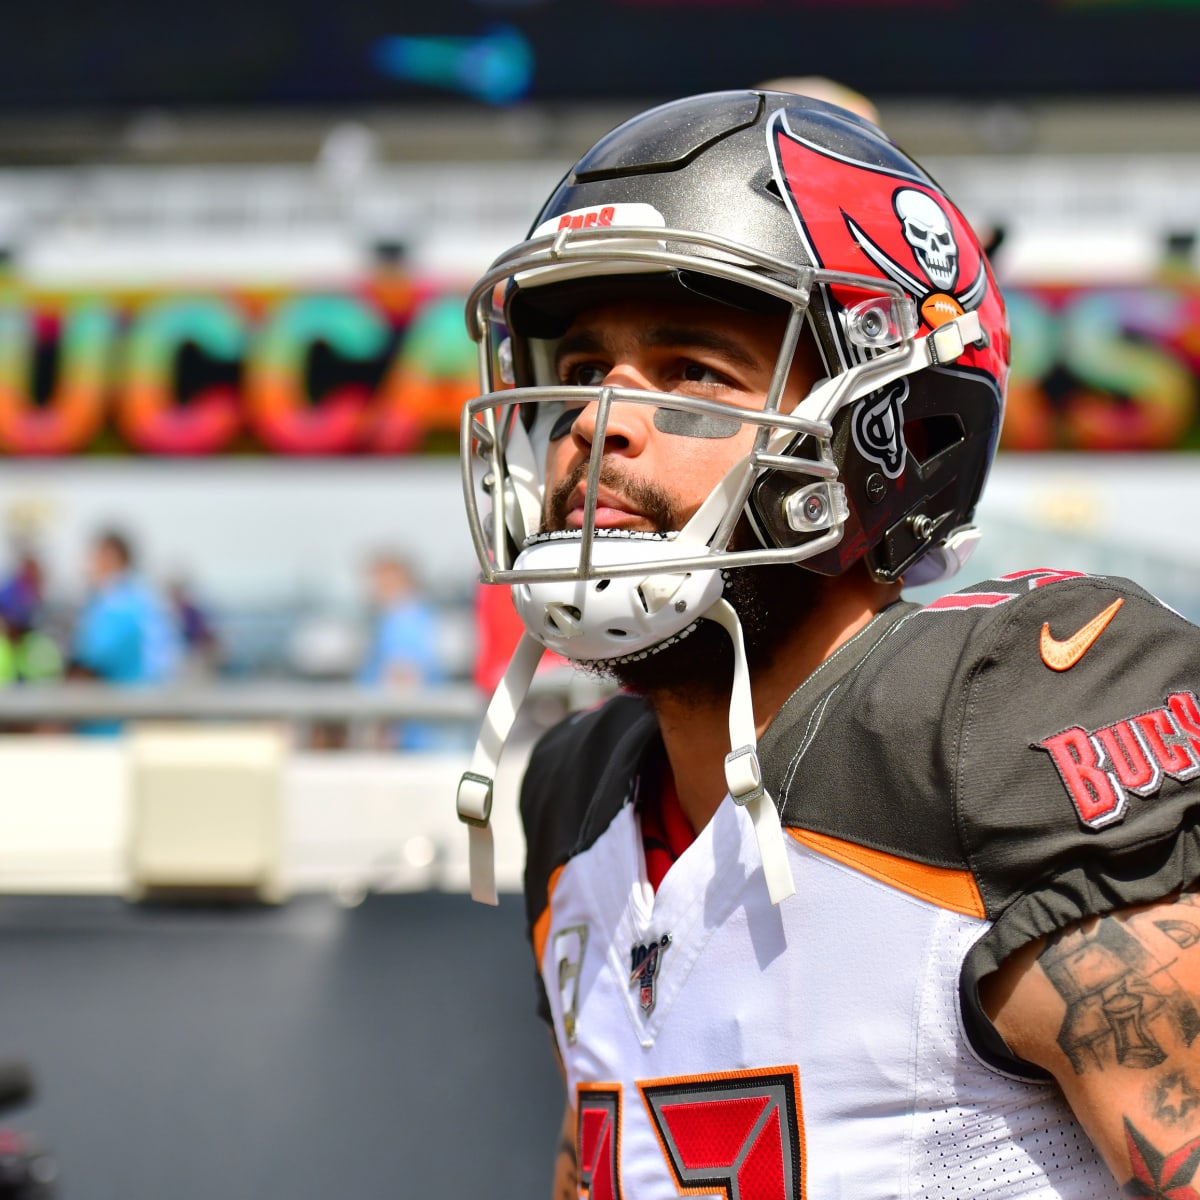 Mike Evans Pens Heartfelt Mother's Day Letter - Tampa Bay Buccaneers, BucsGameday